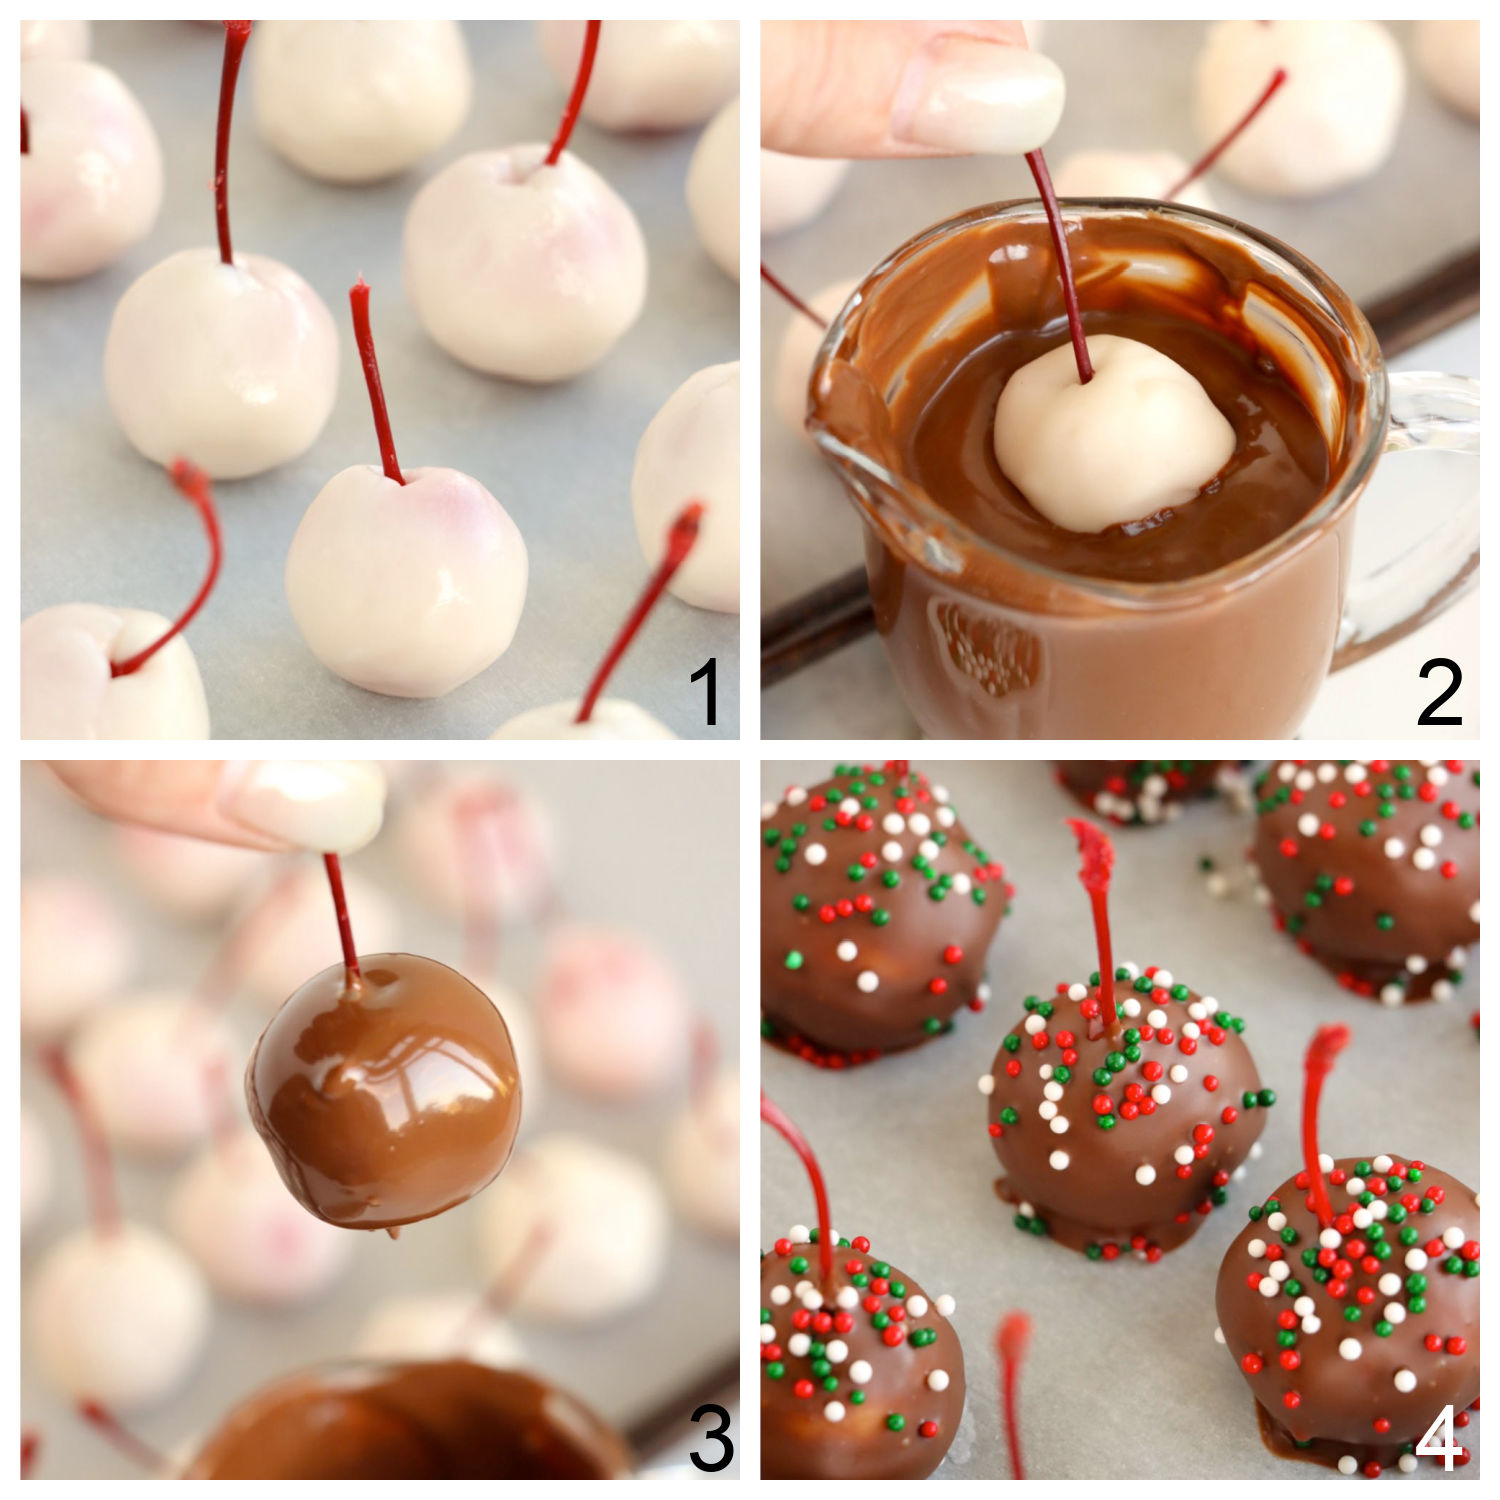 steps for making chocolate covered cherries